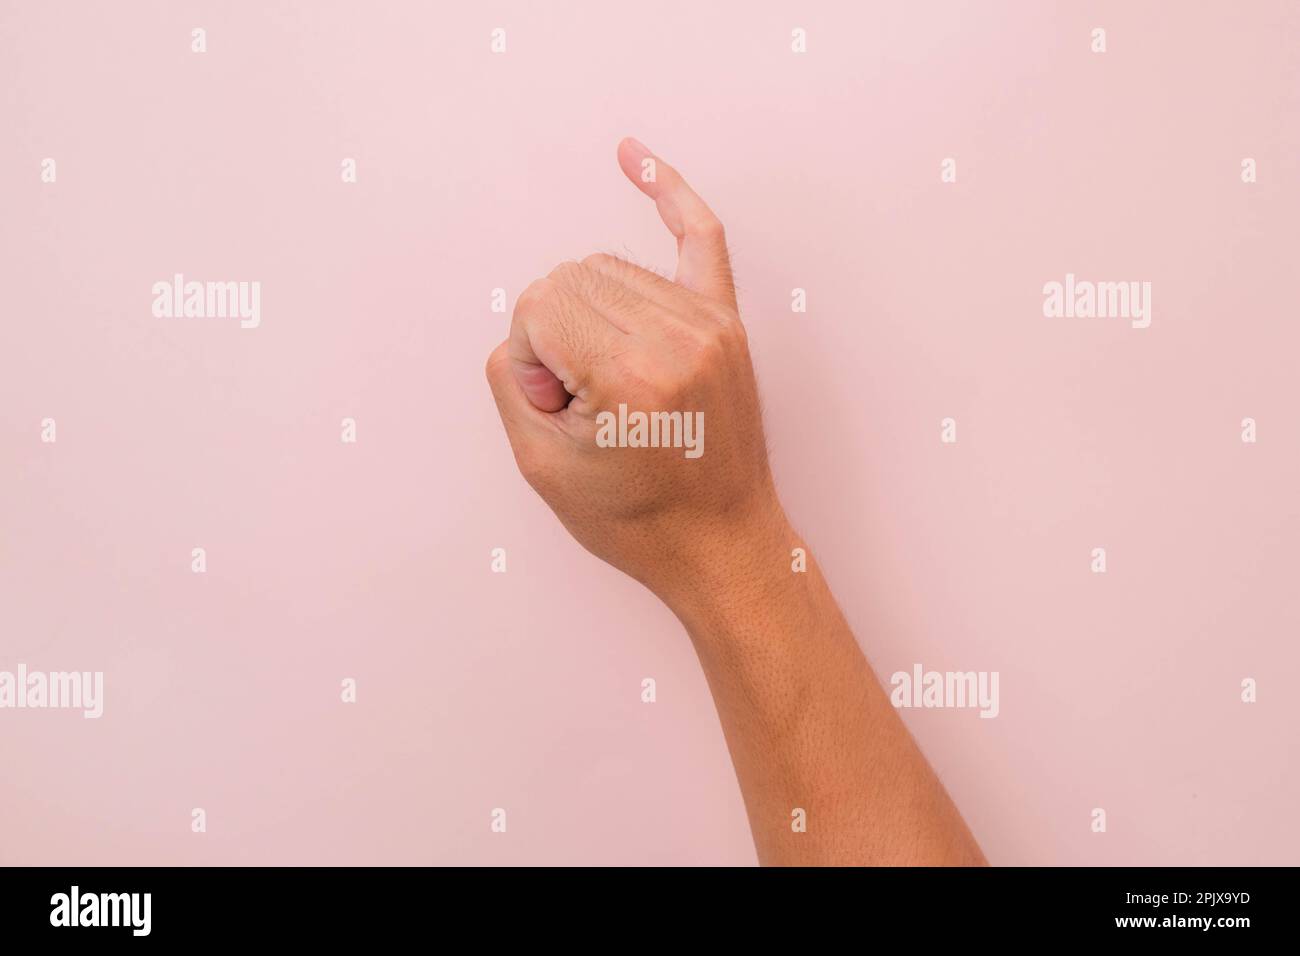 Little finger of male hand against pink background, meaning reconciliation. keeping promise sign. Stock Photo